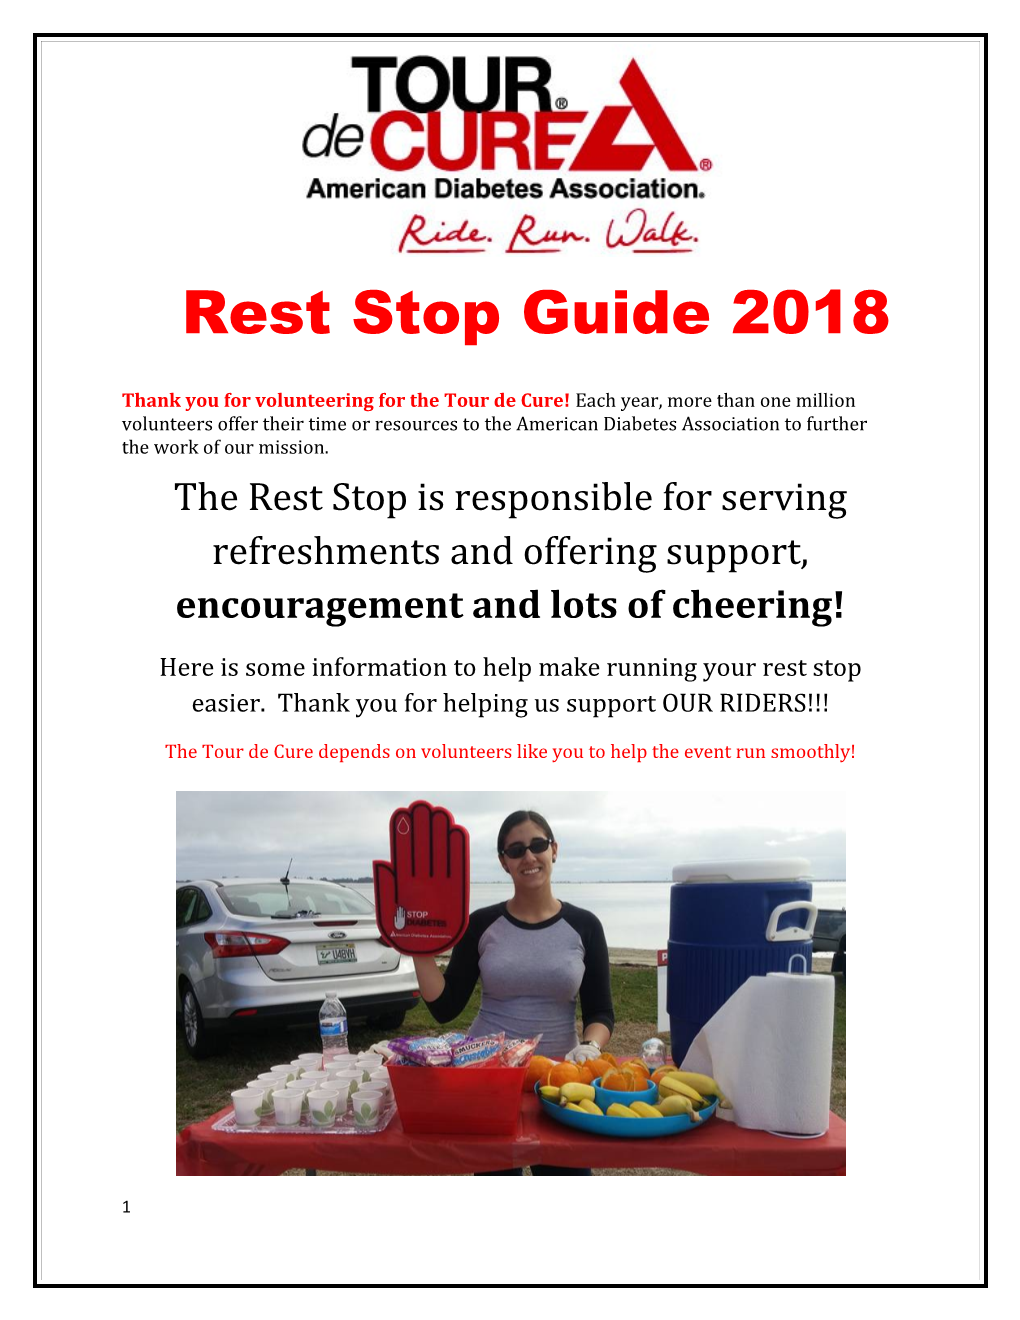 Rest Stop Guide 2018